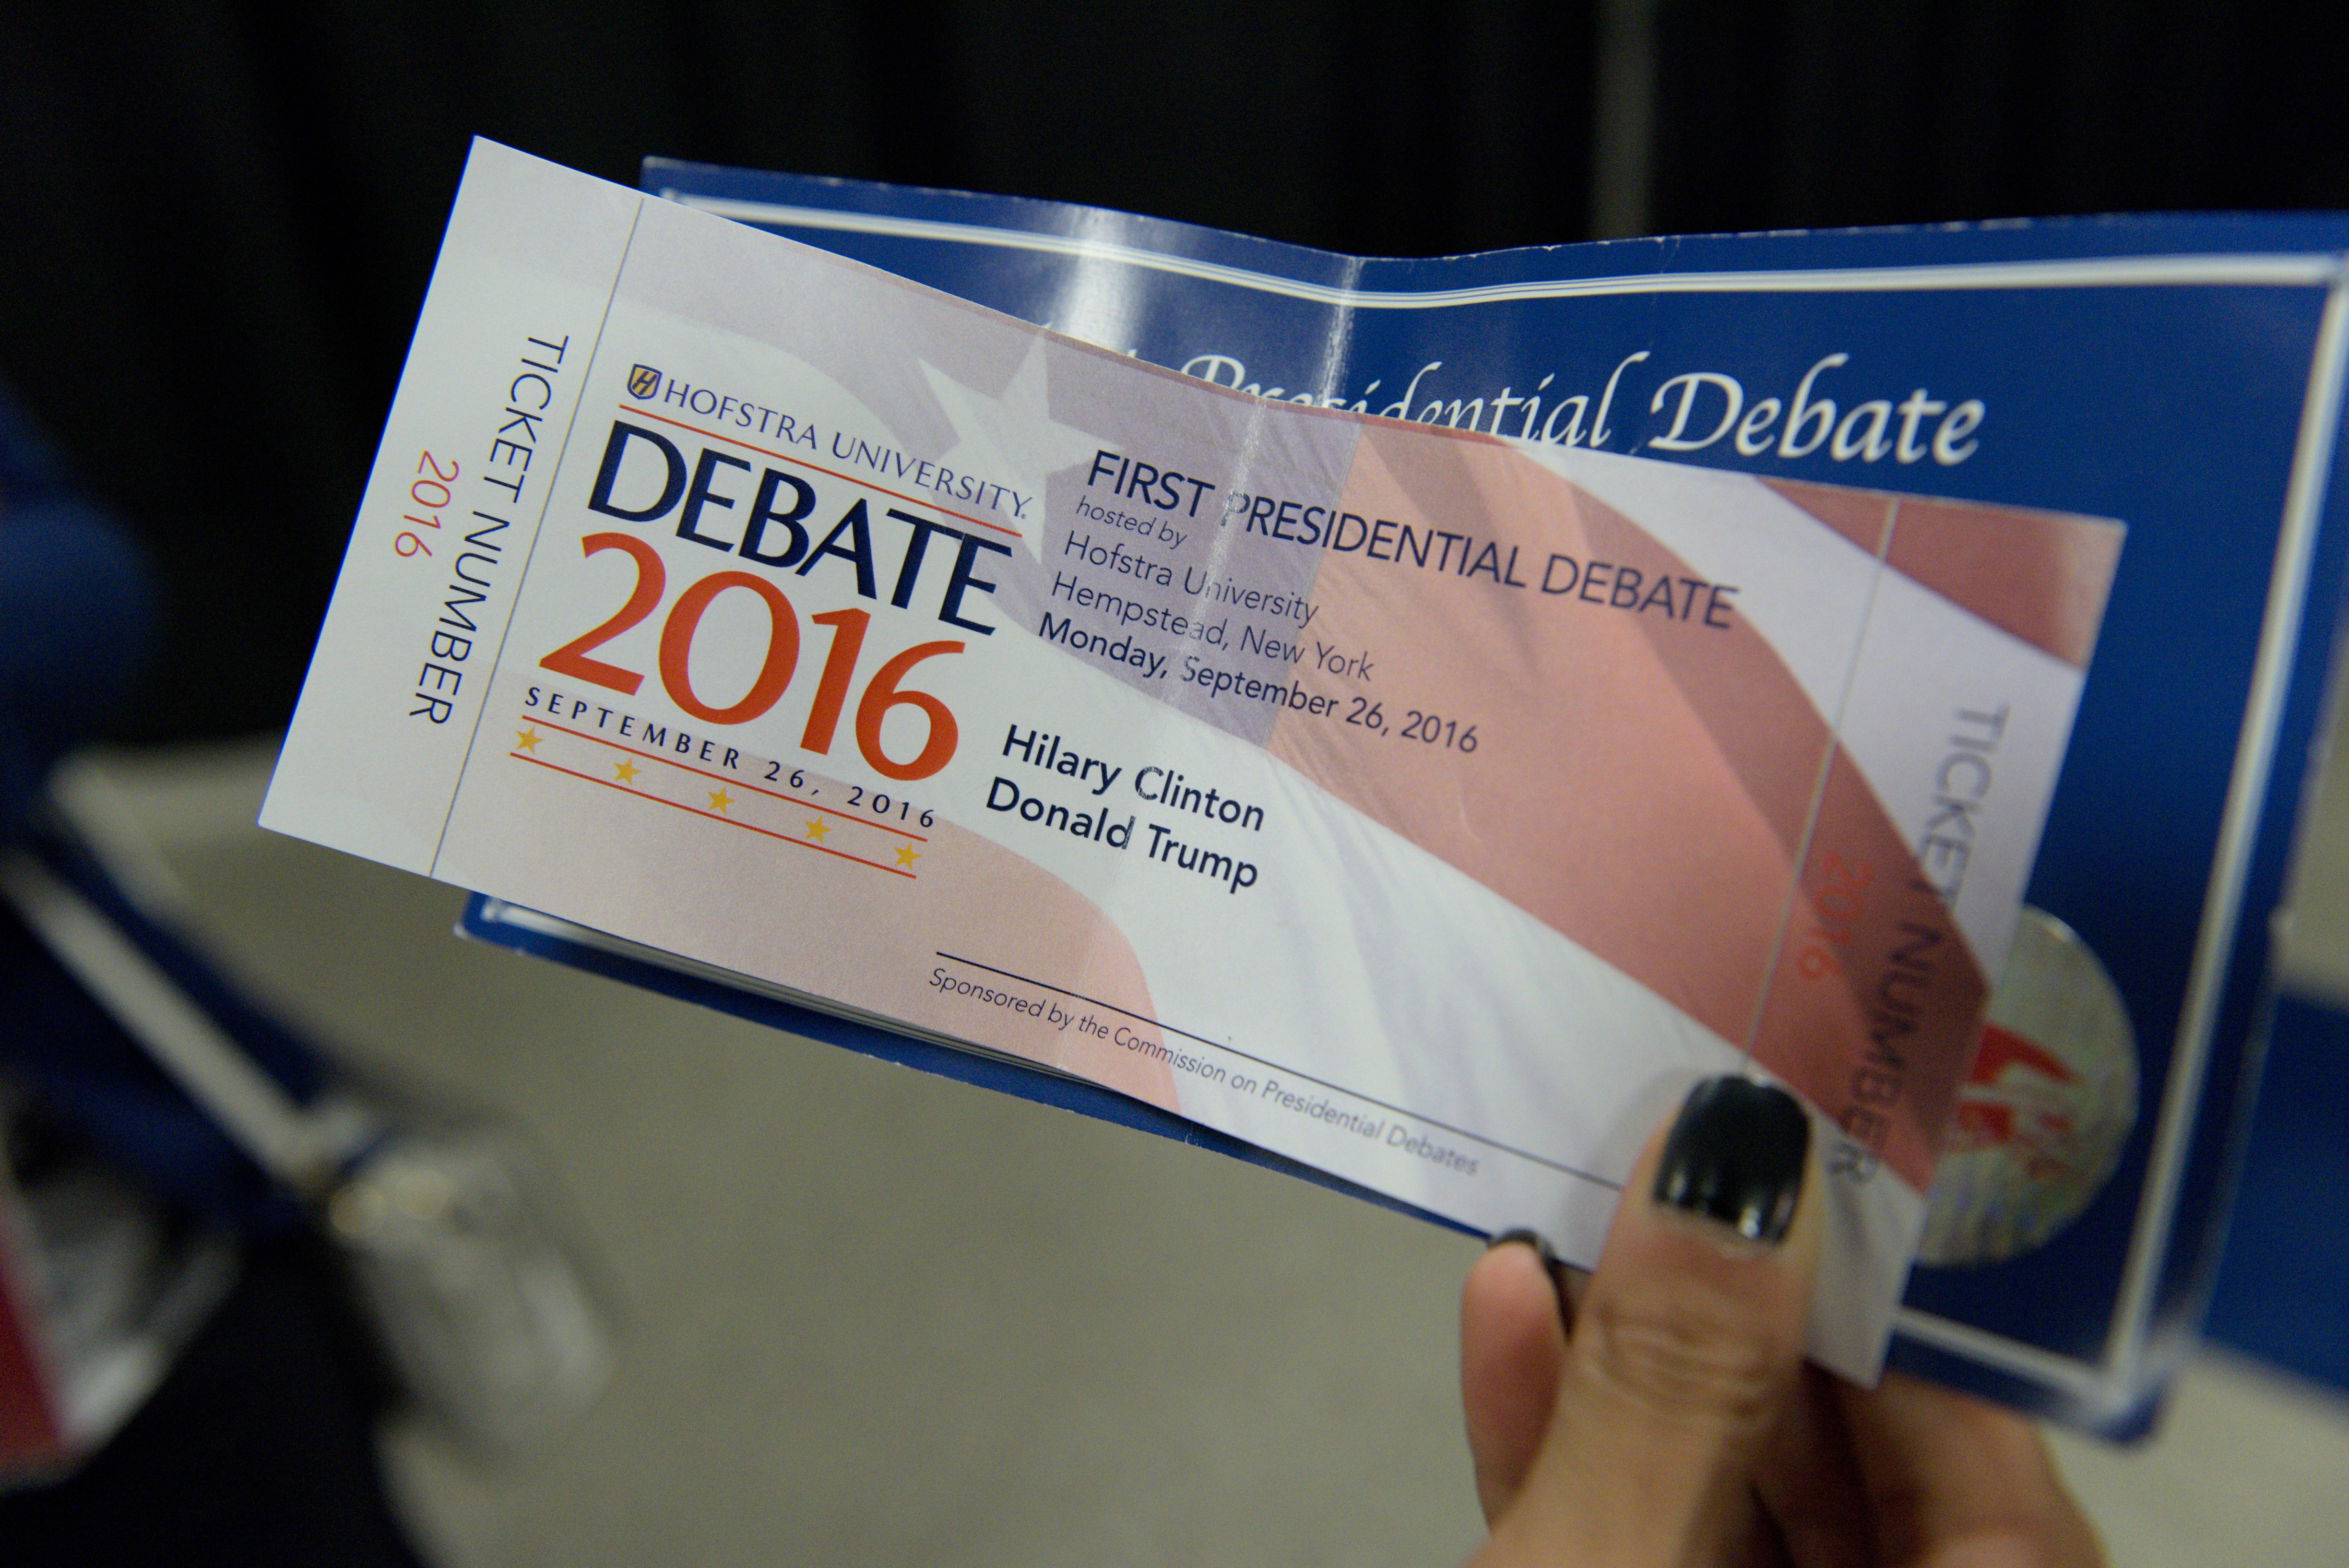 A woman holds a Presidential debate ticket with the name "Hilary" misspelled during the first presidential debate at Hofstra University in Hempstead, New York on September 26, 2016. The first US presidential debate, between Democratic candidate Hillary Clinton and Republican Donald Trump, is one of the high points of the campaign, six weeks from the November 8 elections. / AFP PHOTO / Brendan SMIALOWSKI